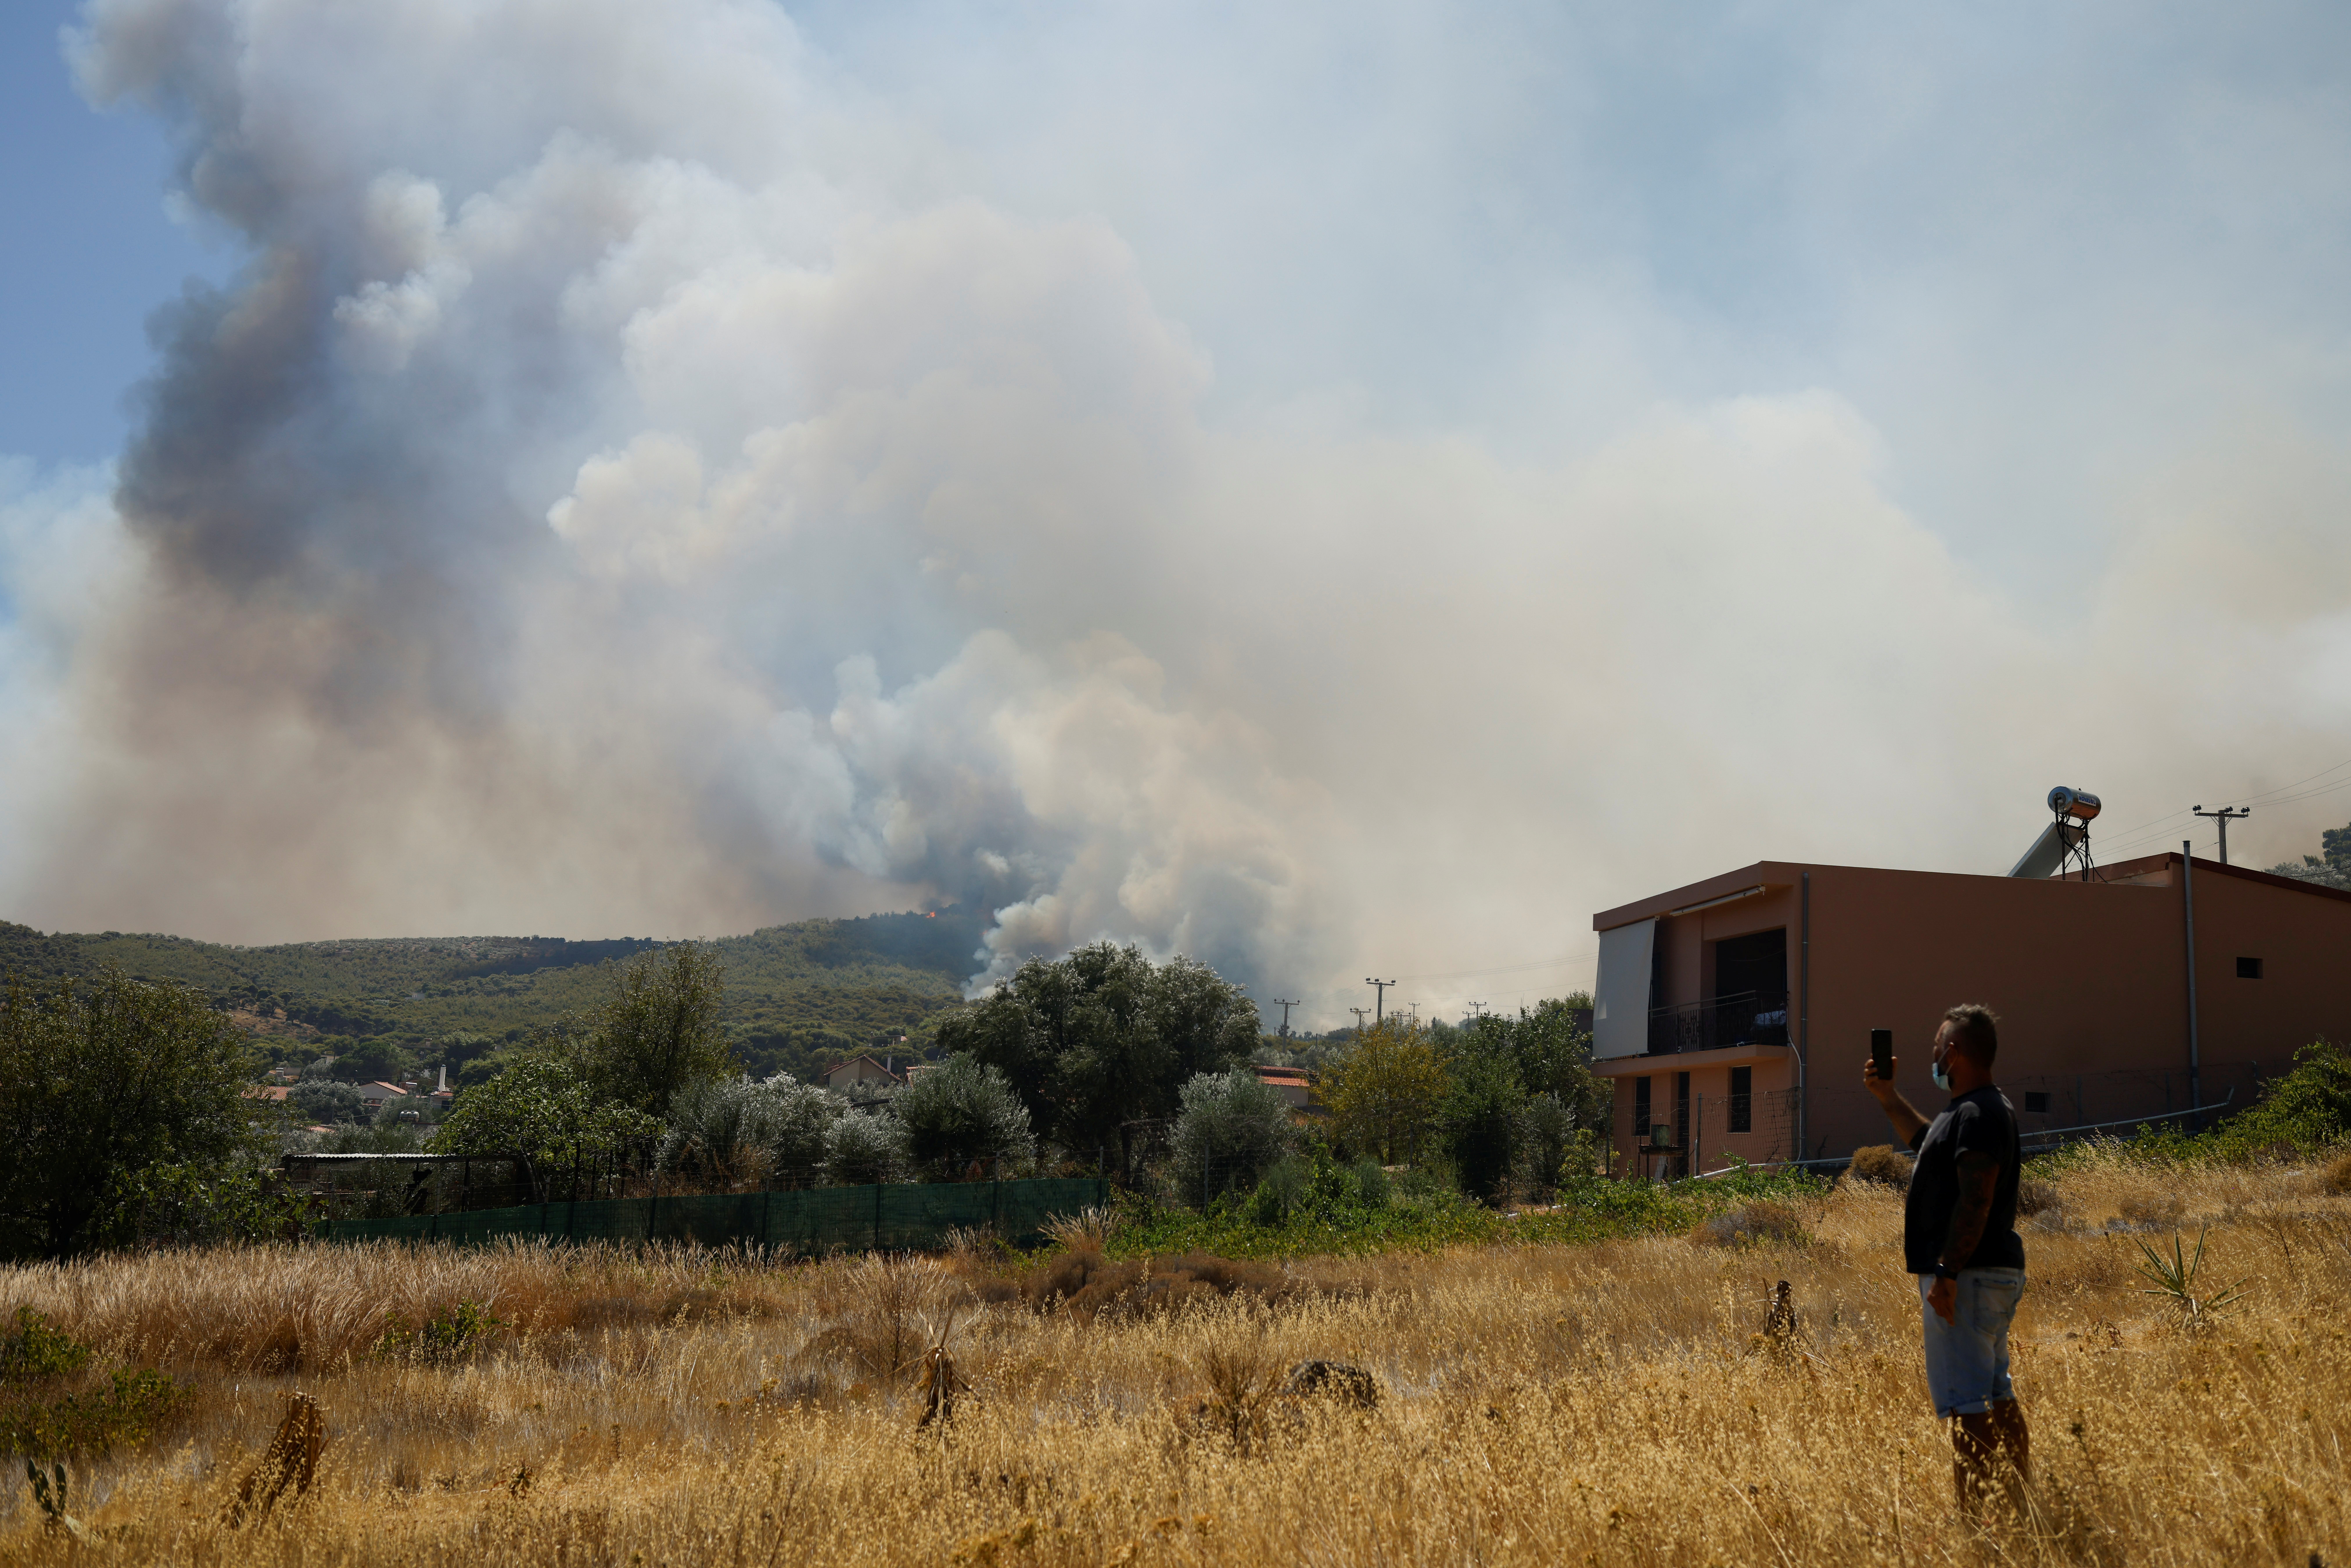 A man takes a picture of a wildfire burning in the village of Markati, near Athens, Greece, August 16, 2021. REUTERS/Alkis Konstantinidis